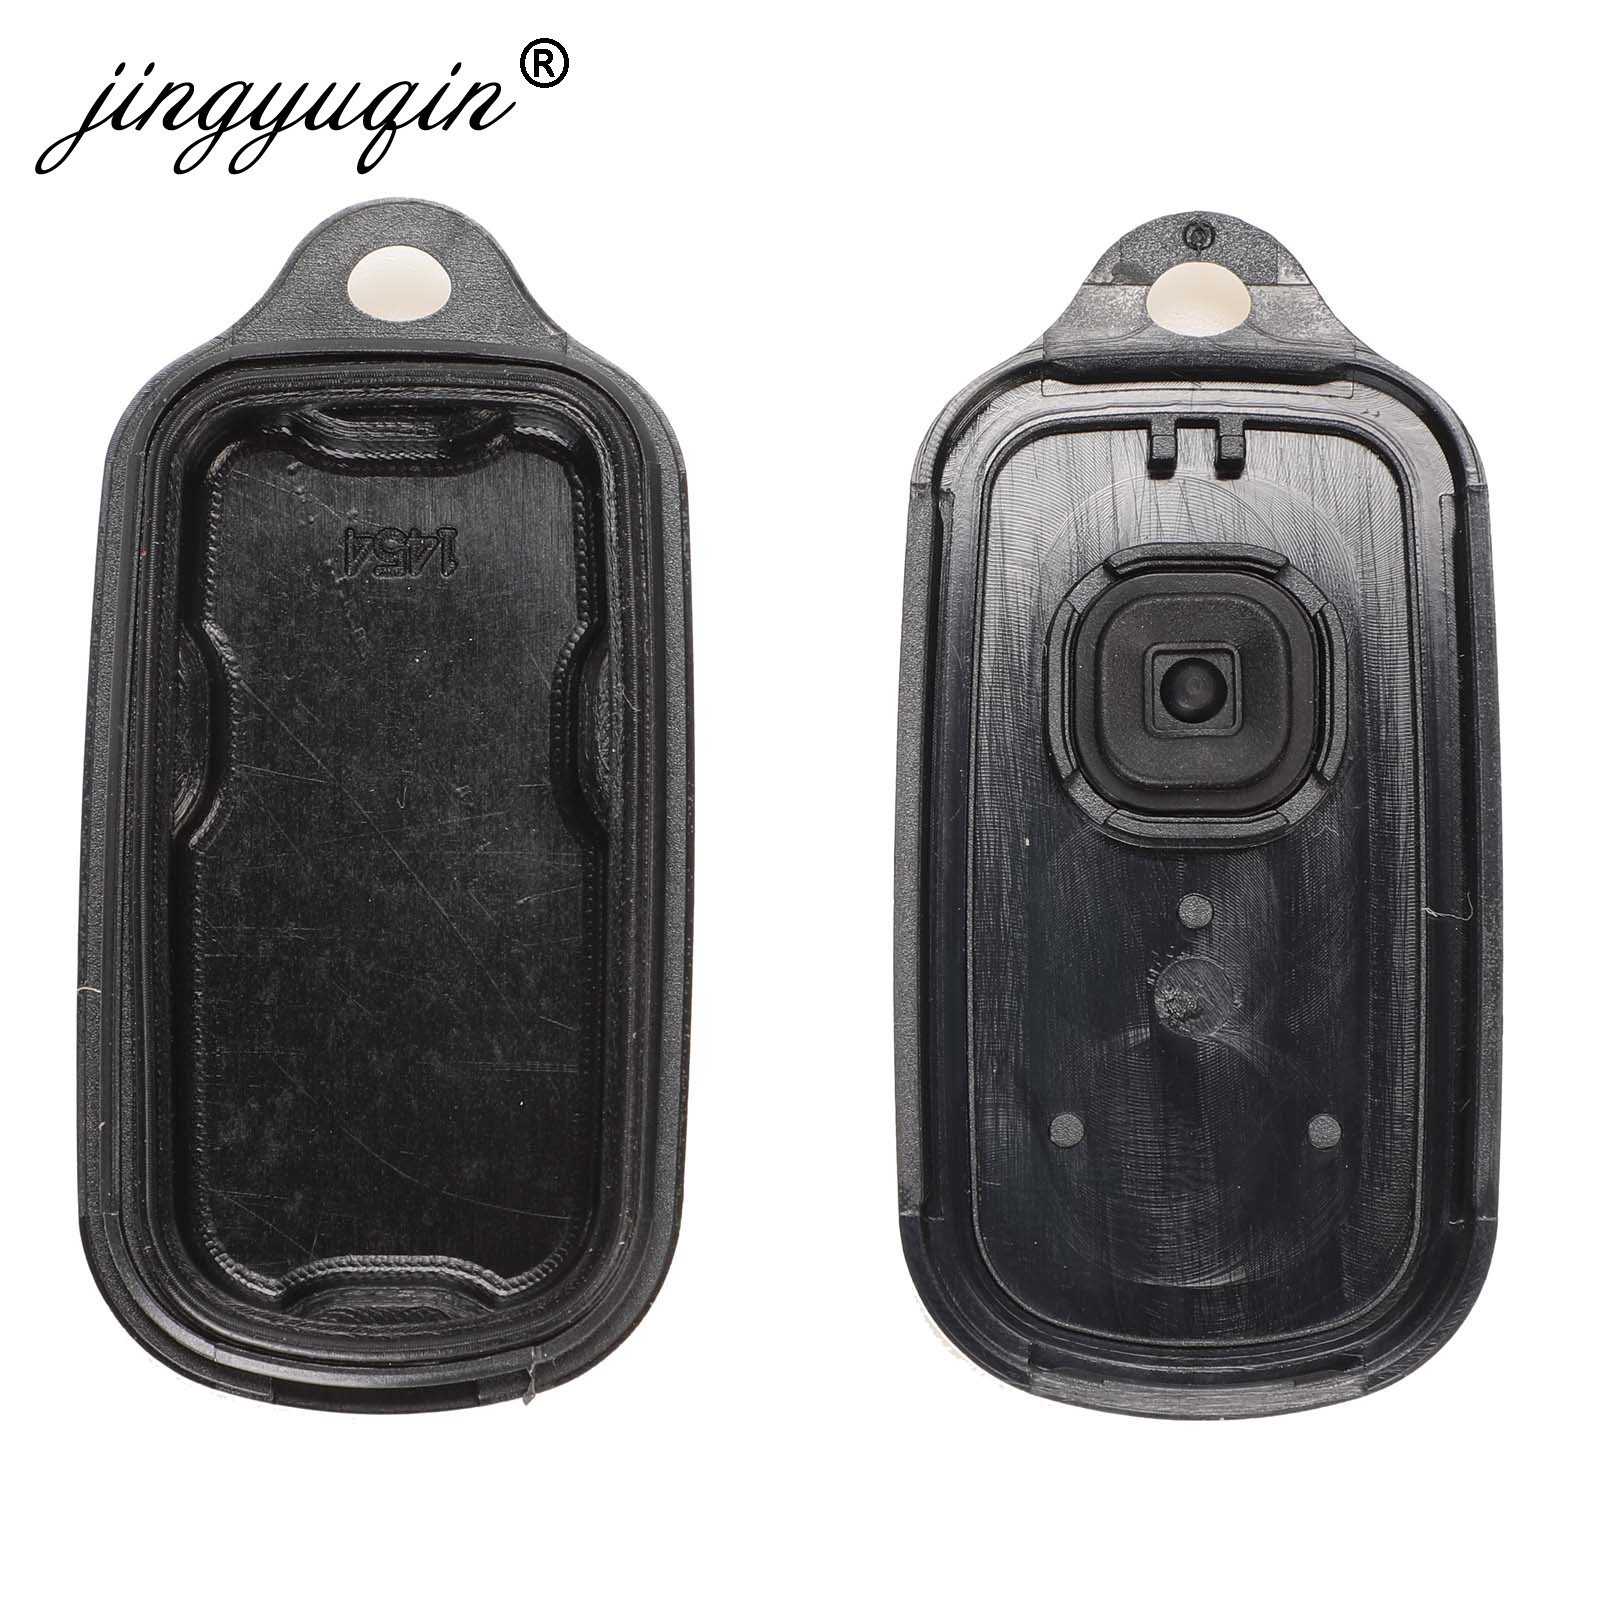 jingyuqin Remote Key Shell Fob 3 Panic Button For Toyota Sequoia 4Runner 4Runner 2003-2008 Keyless Replacement